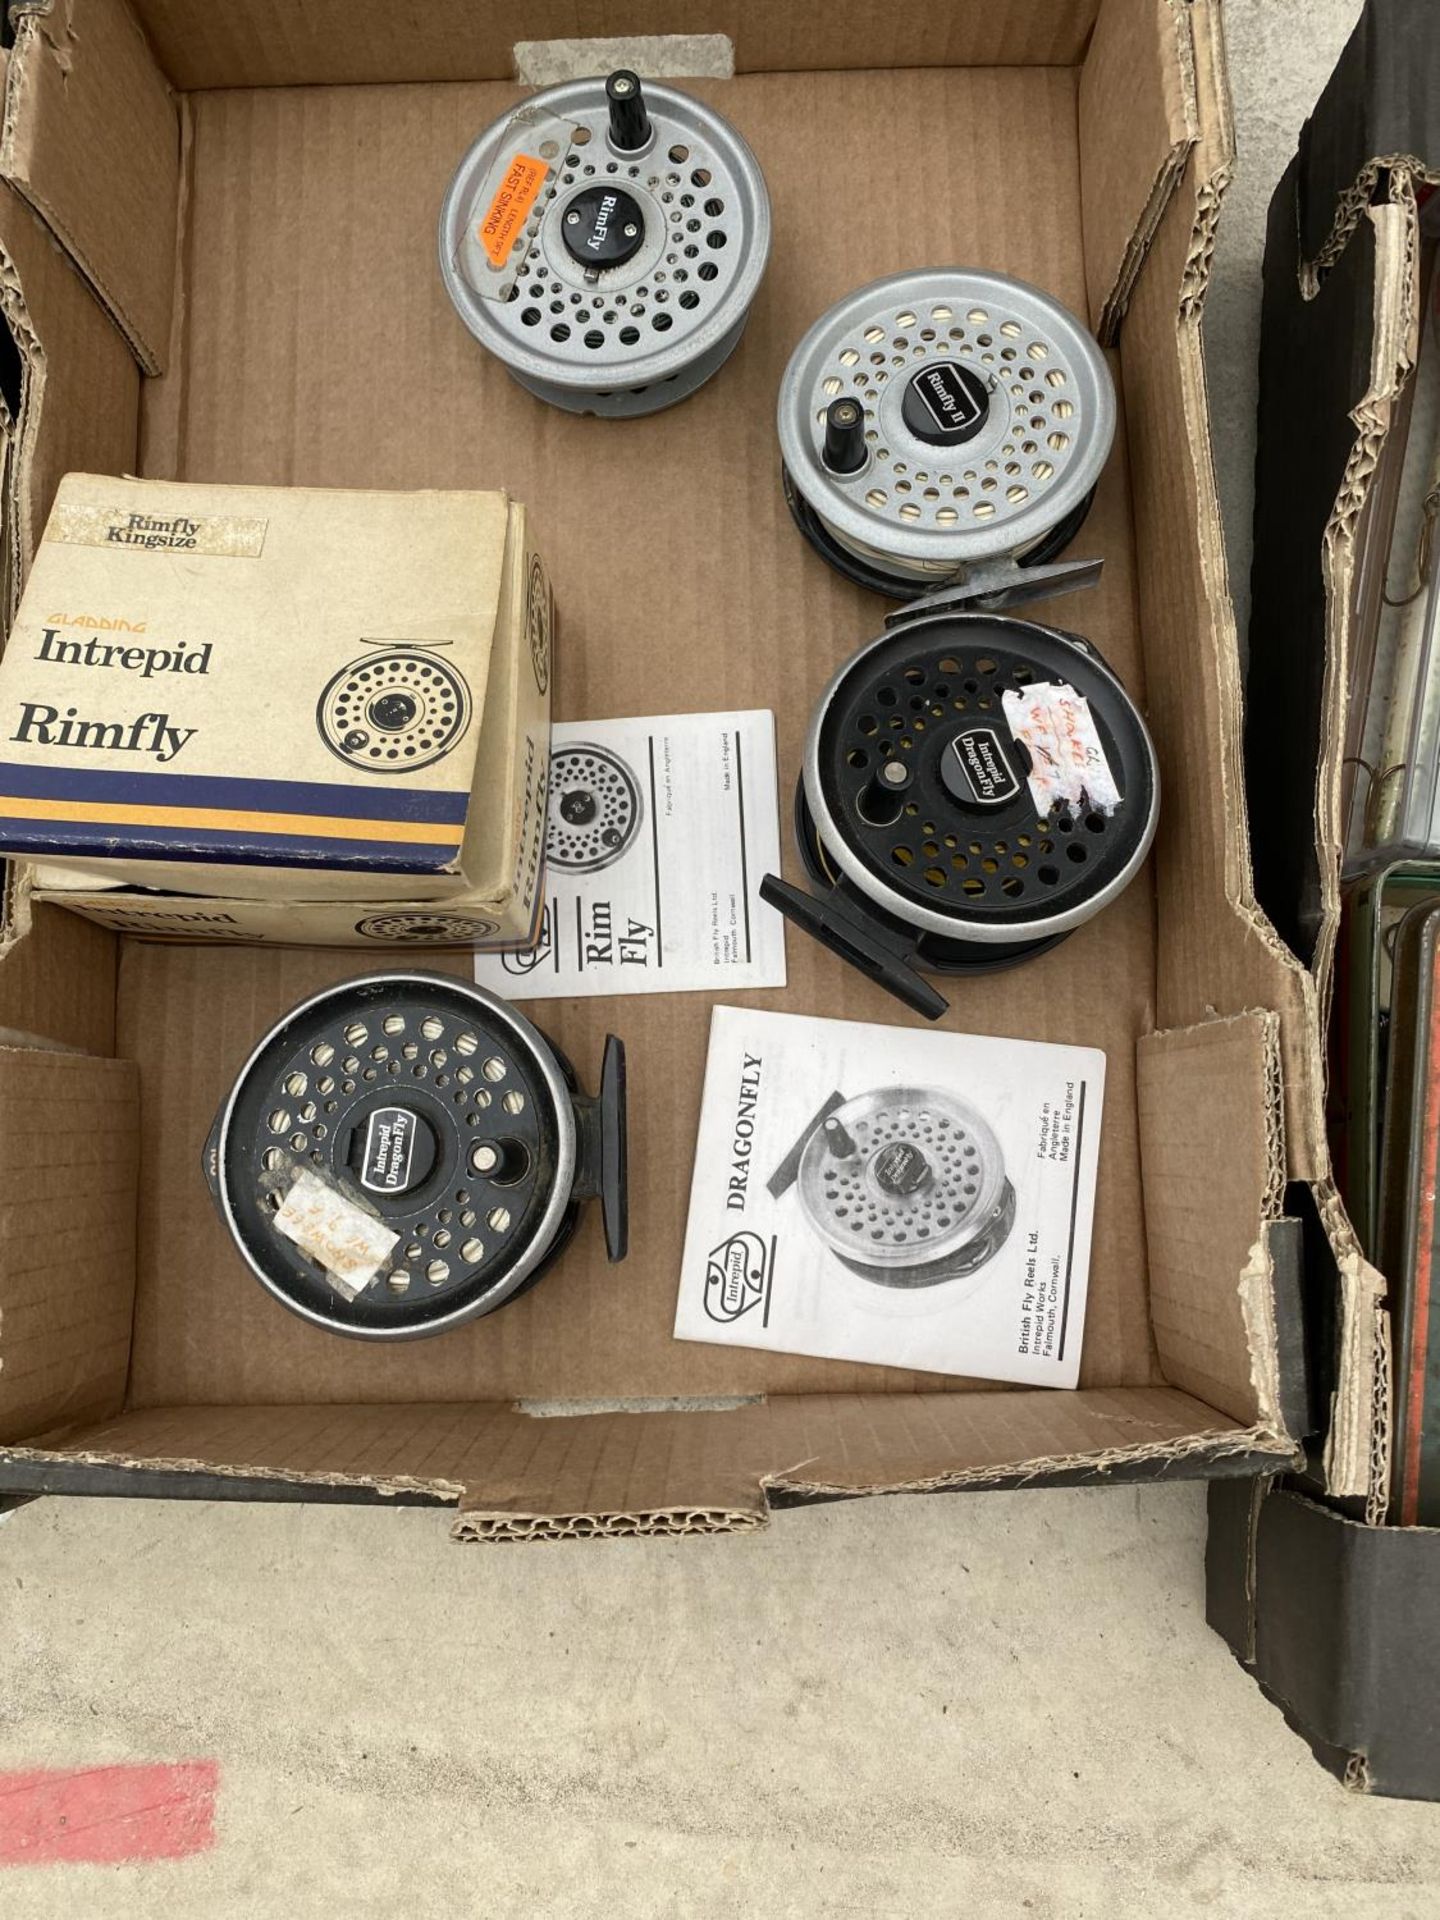 TWO DRAGONFLY FLY FISHING REELS, A REGULAR RIMFLY REEL AND A KINGSIZE RIMFLY REEL AND SPARE SPOOL